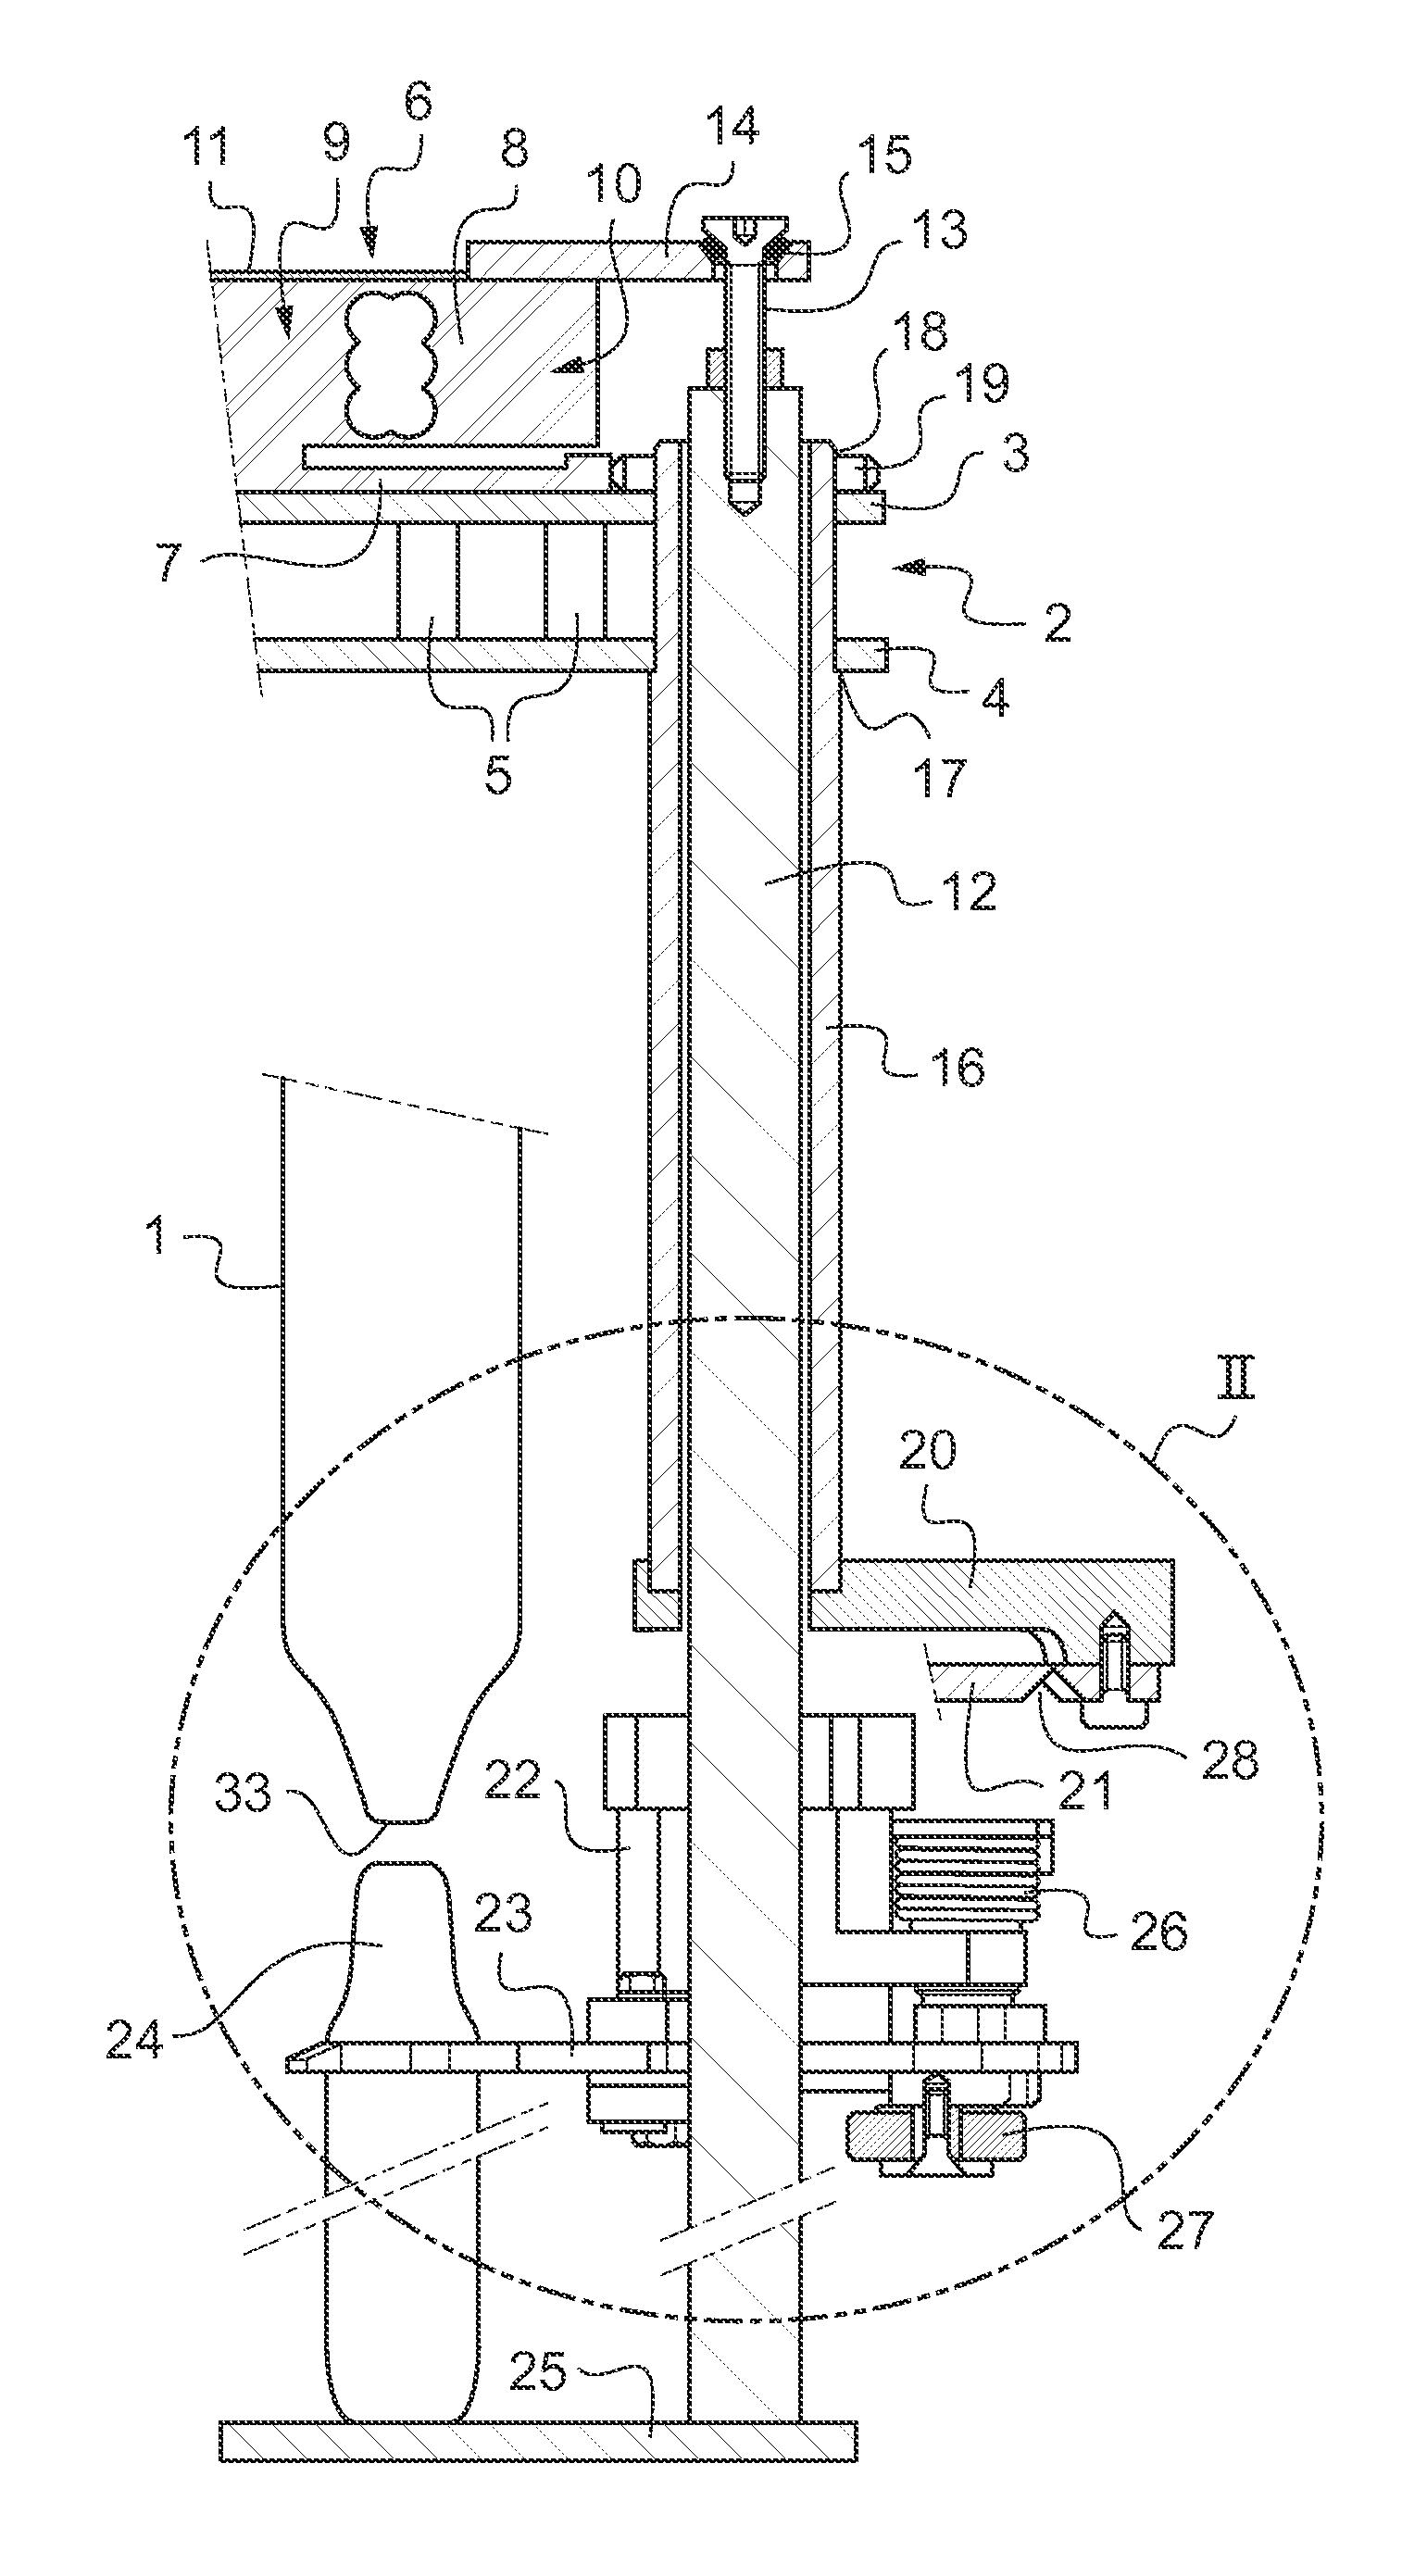 Device for filling containers by weight, the device being fitted with an anti-vibration member